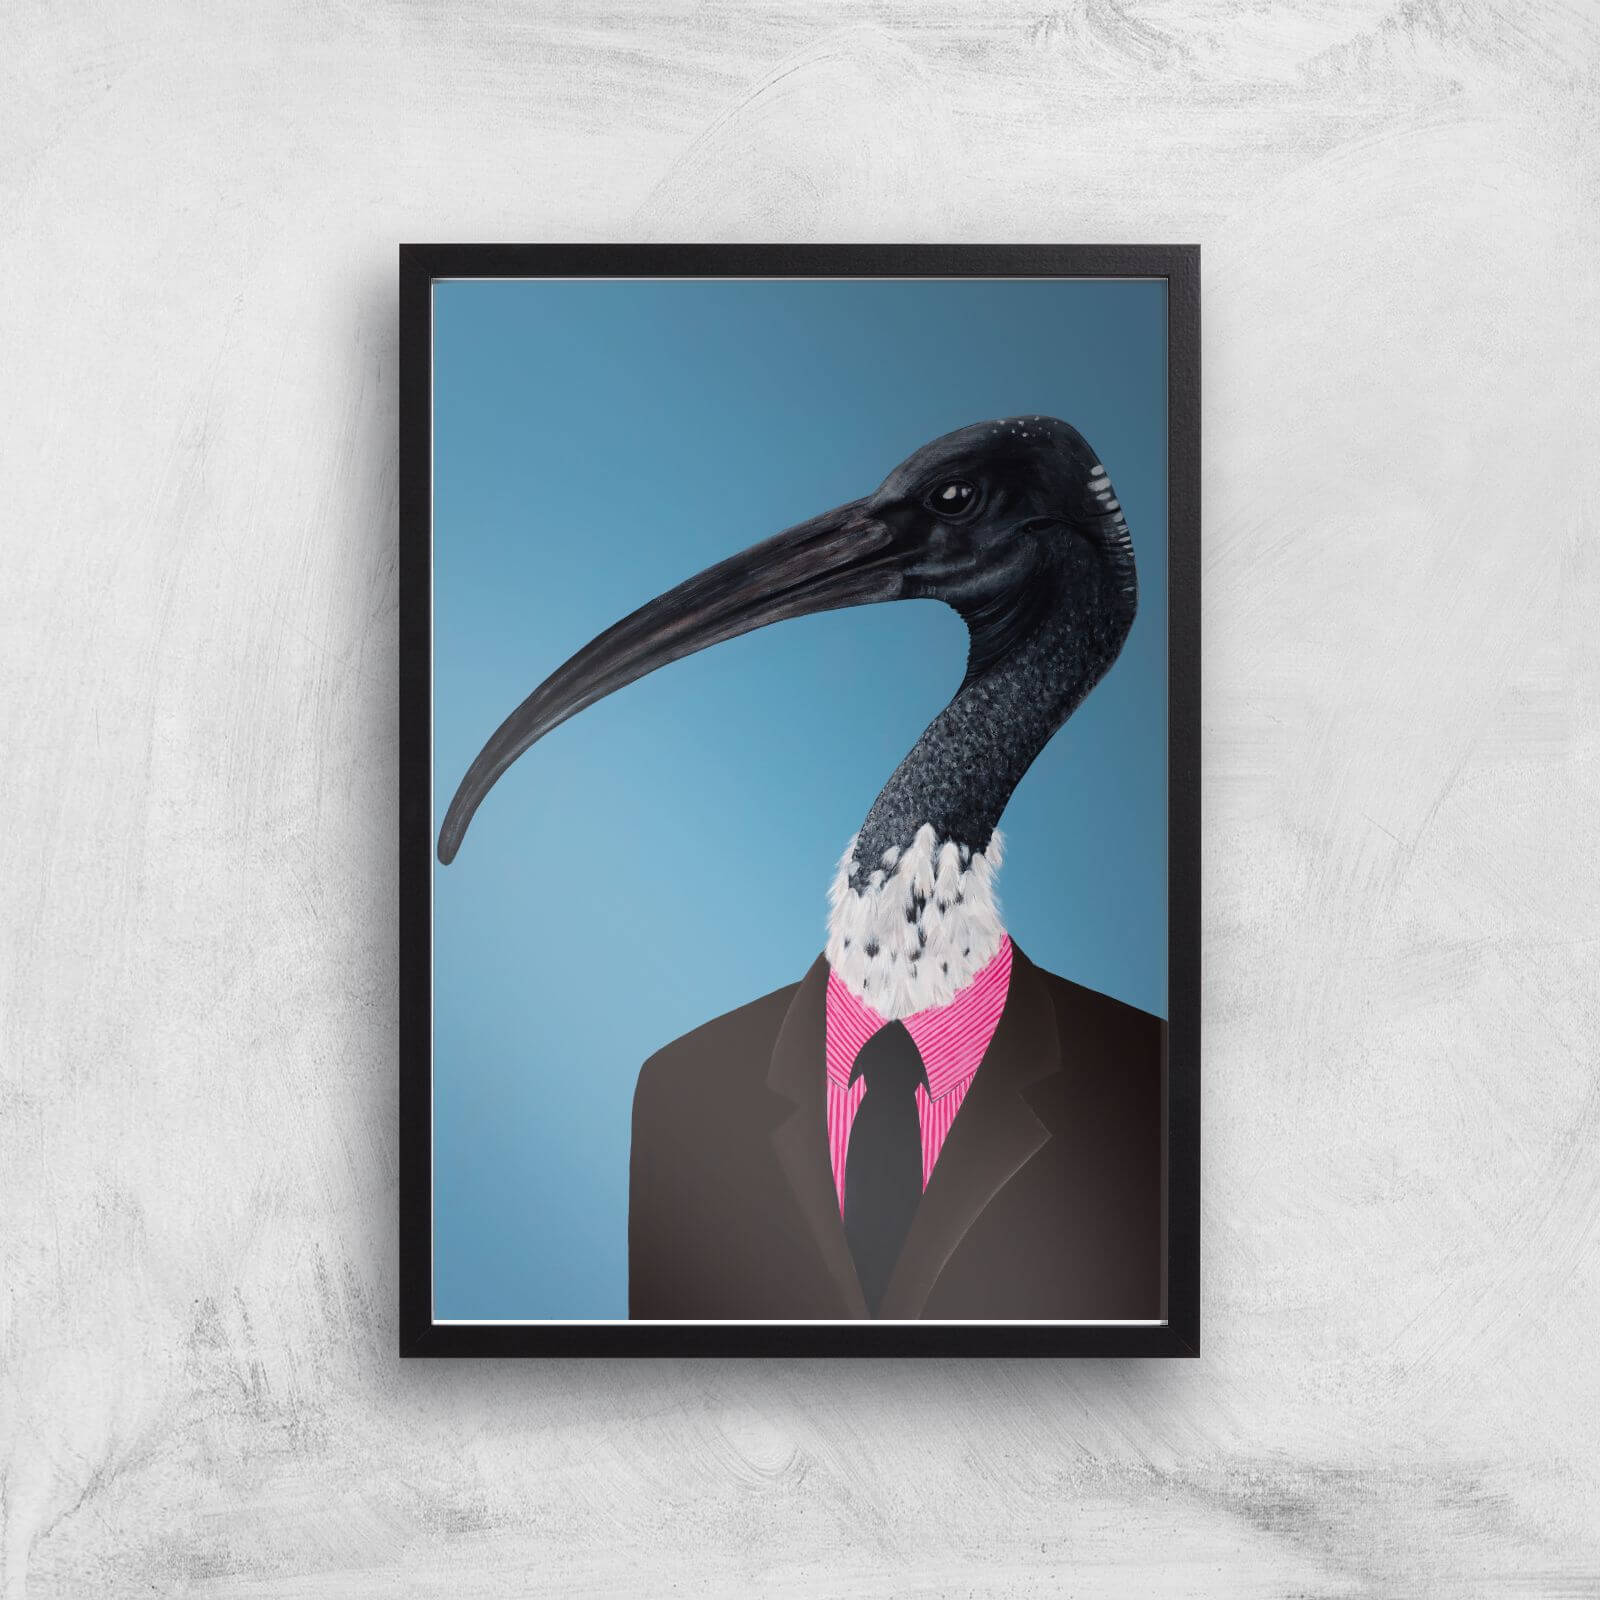 Ibis In Suit Giclee Art Print - A3 - Black Frame